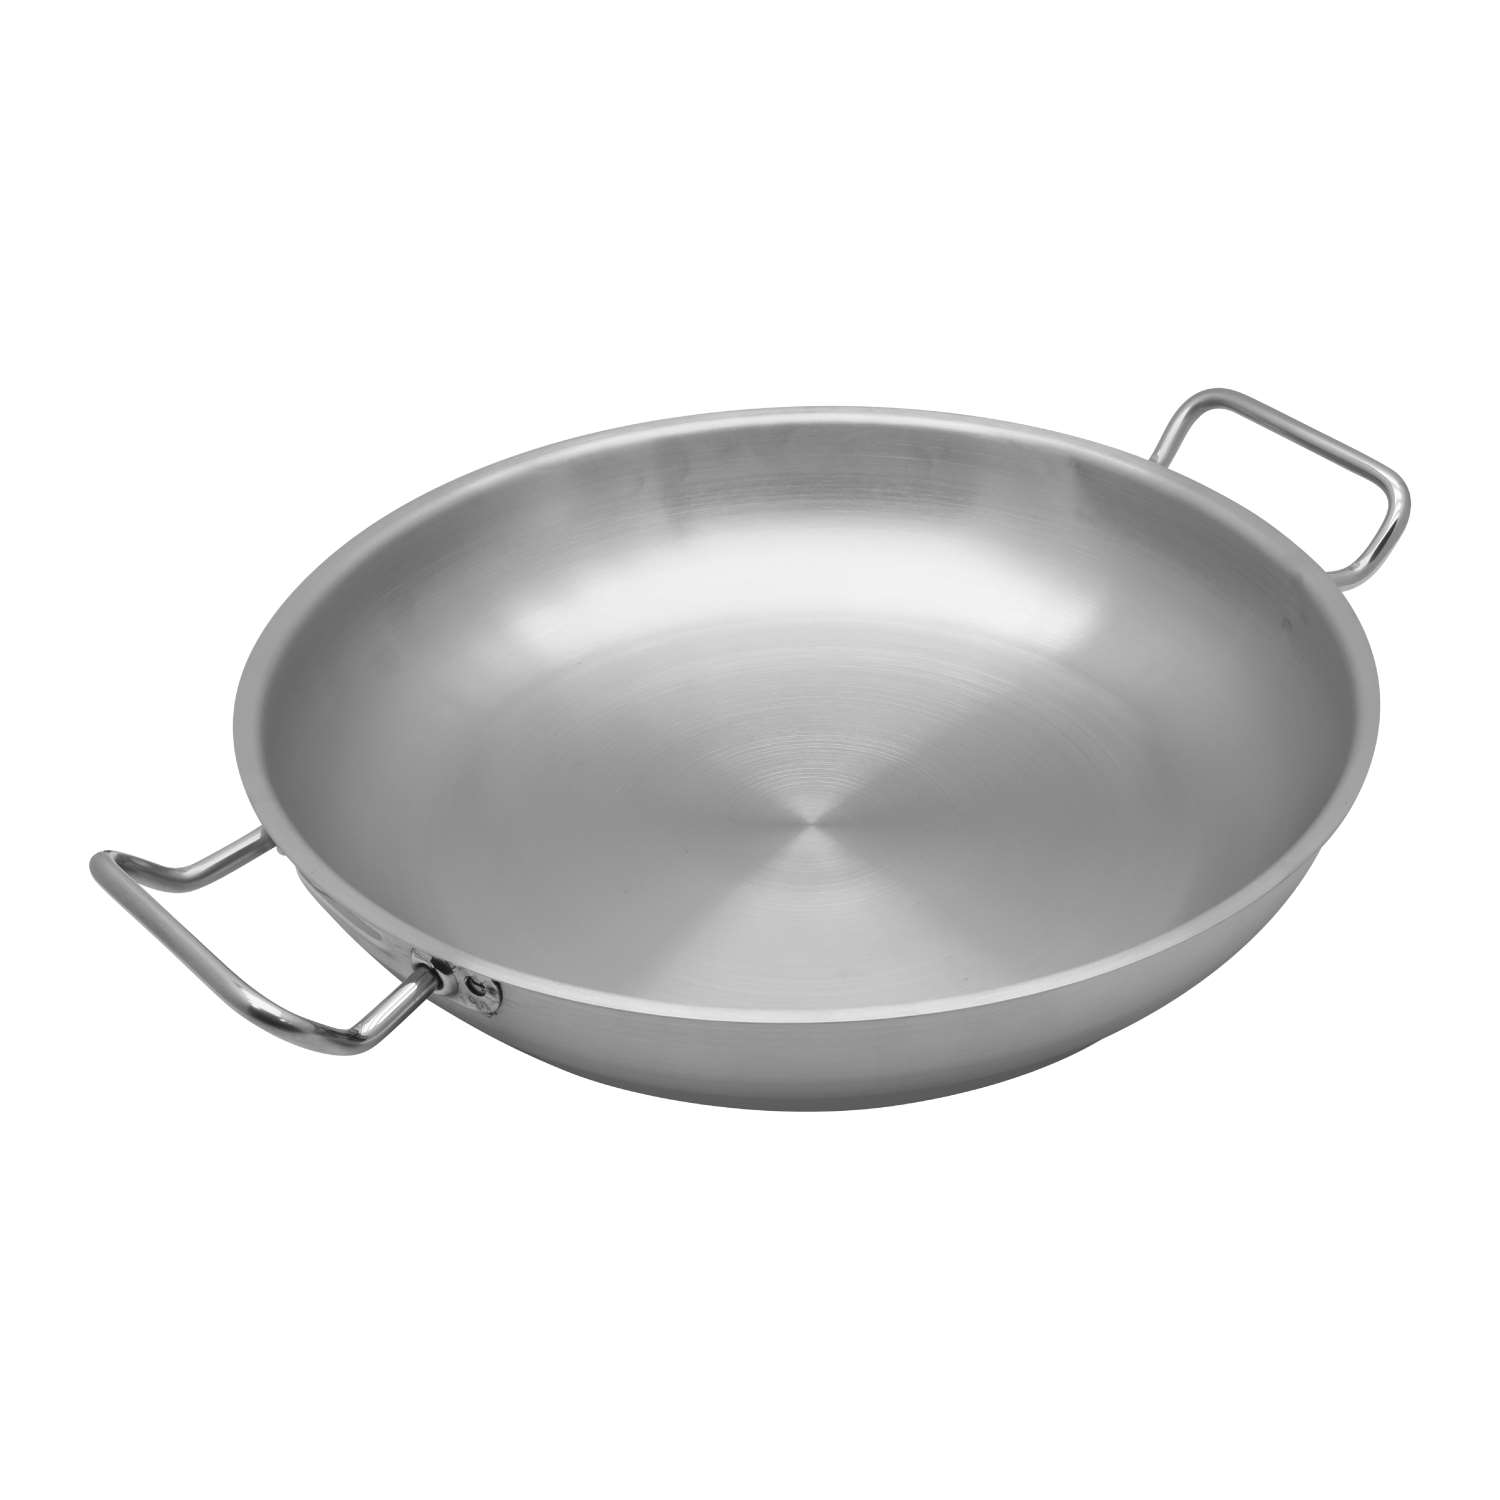 Chefset Steel Fry Pan With Side Handle 30Cm